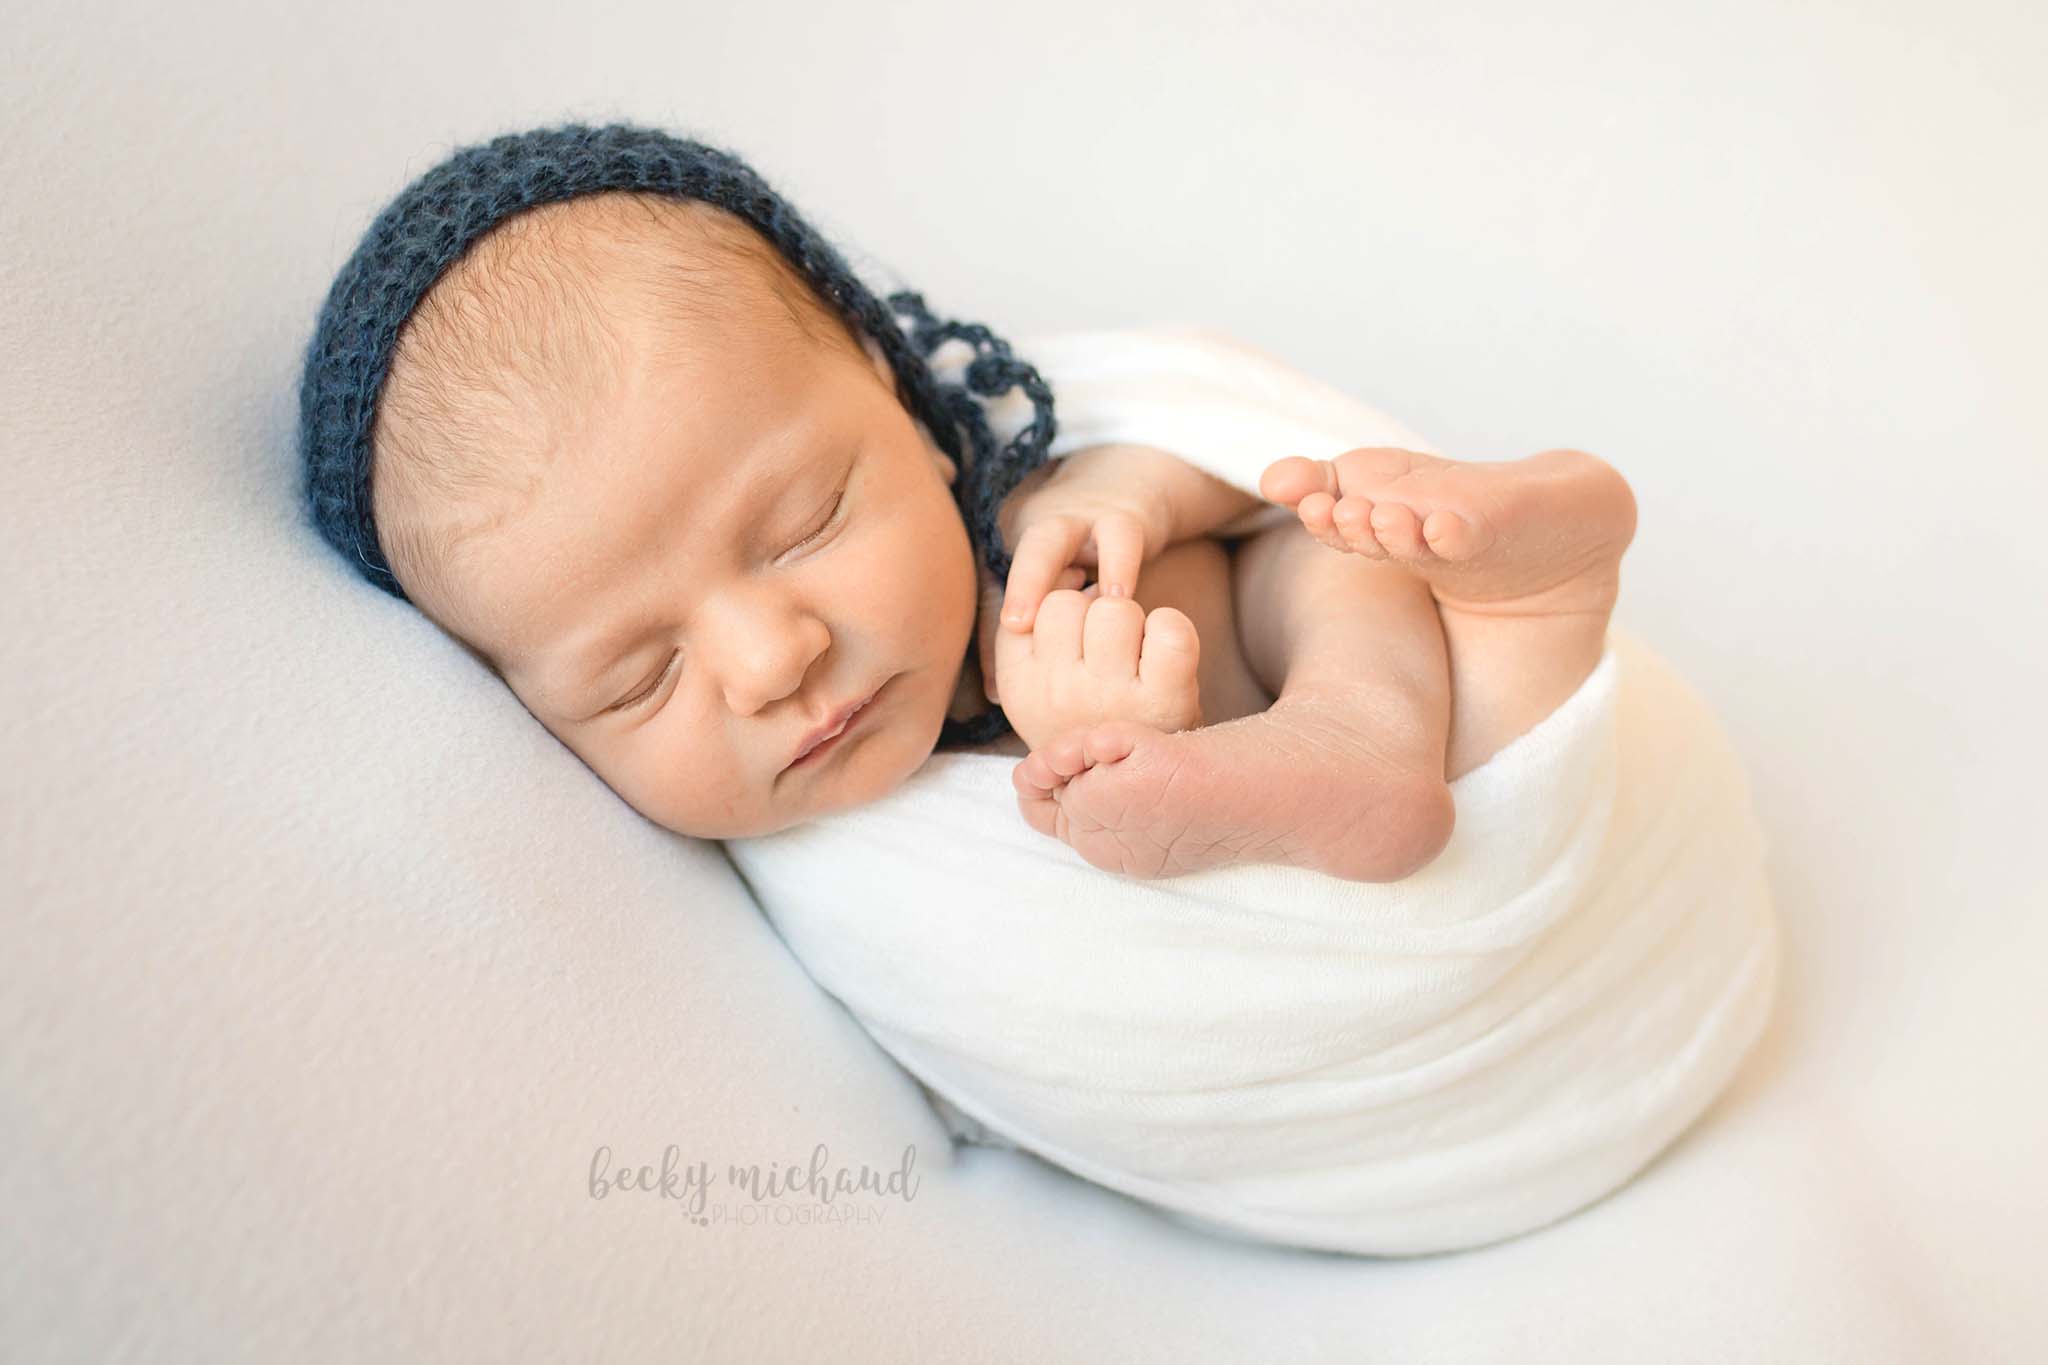 simple newborn photo of a baby on a white blanket wearing a blue bonnet in Fort Collins, Colorado